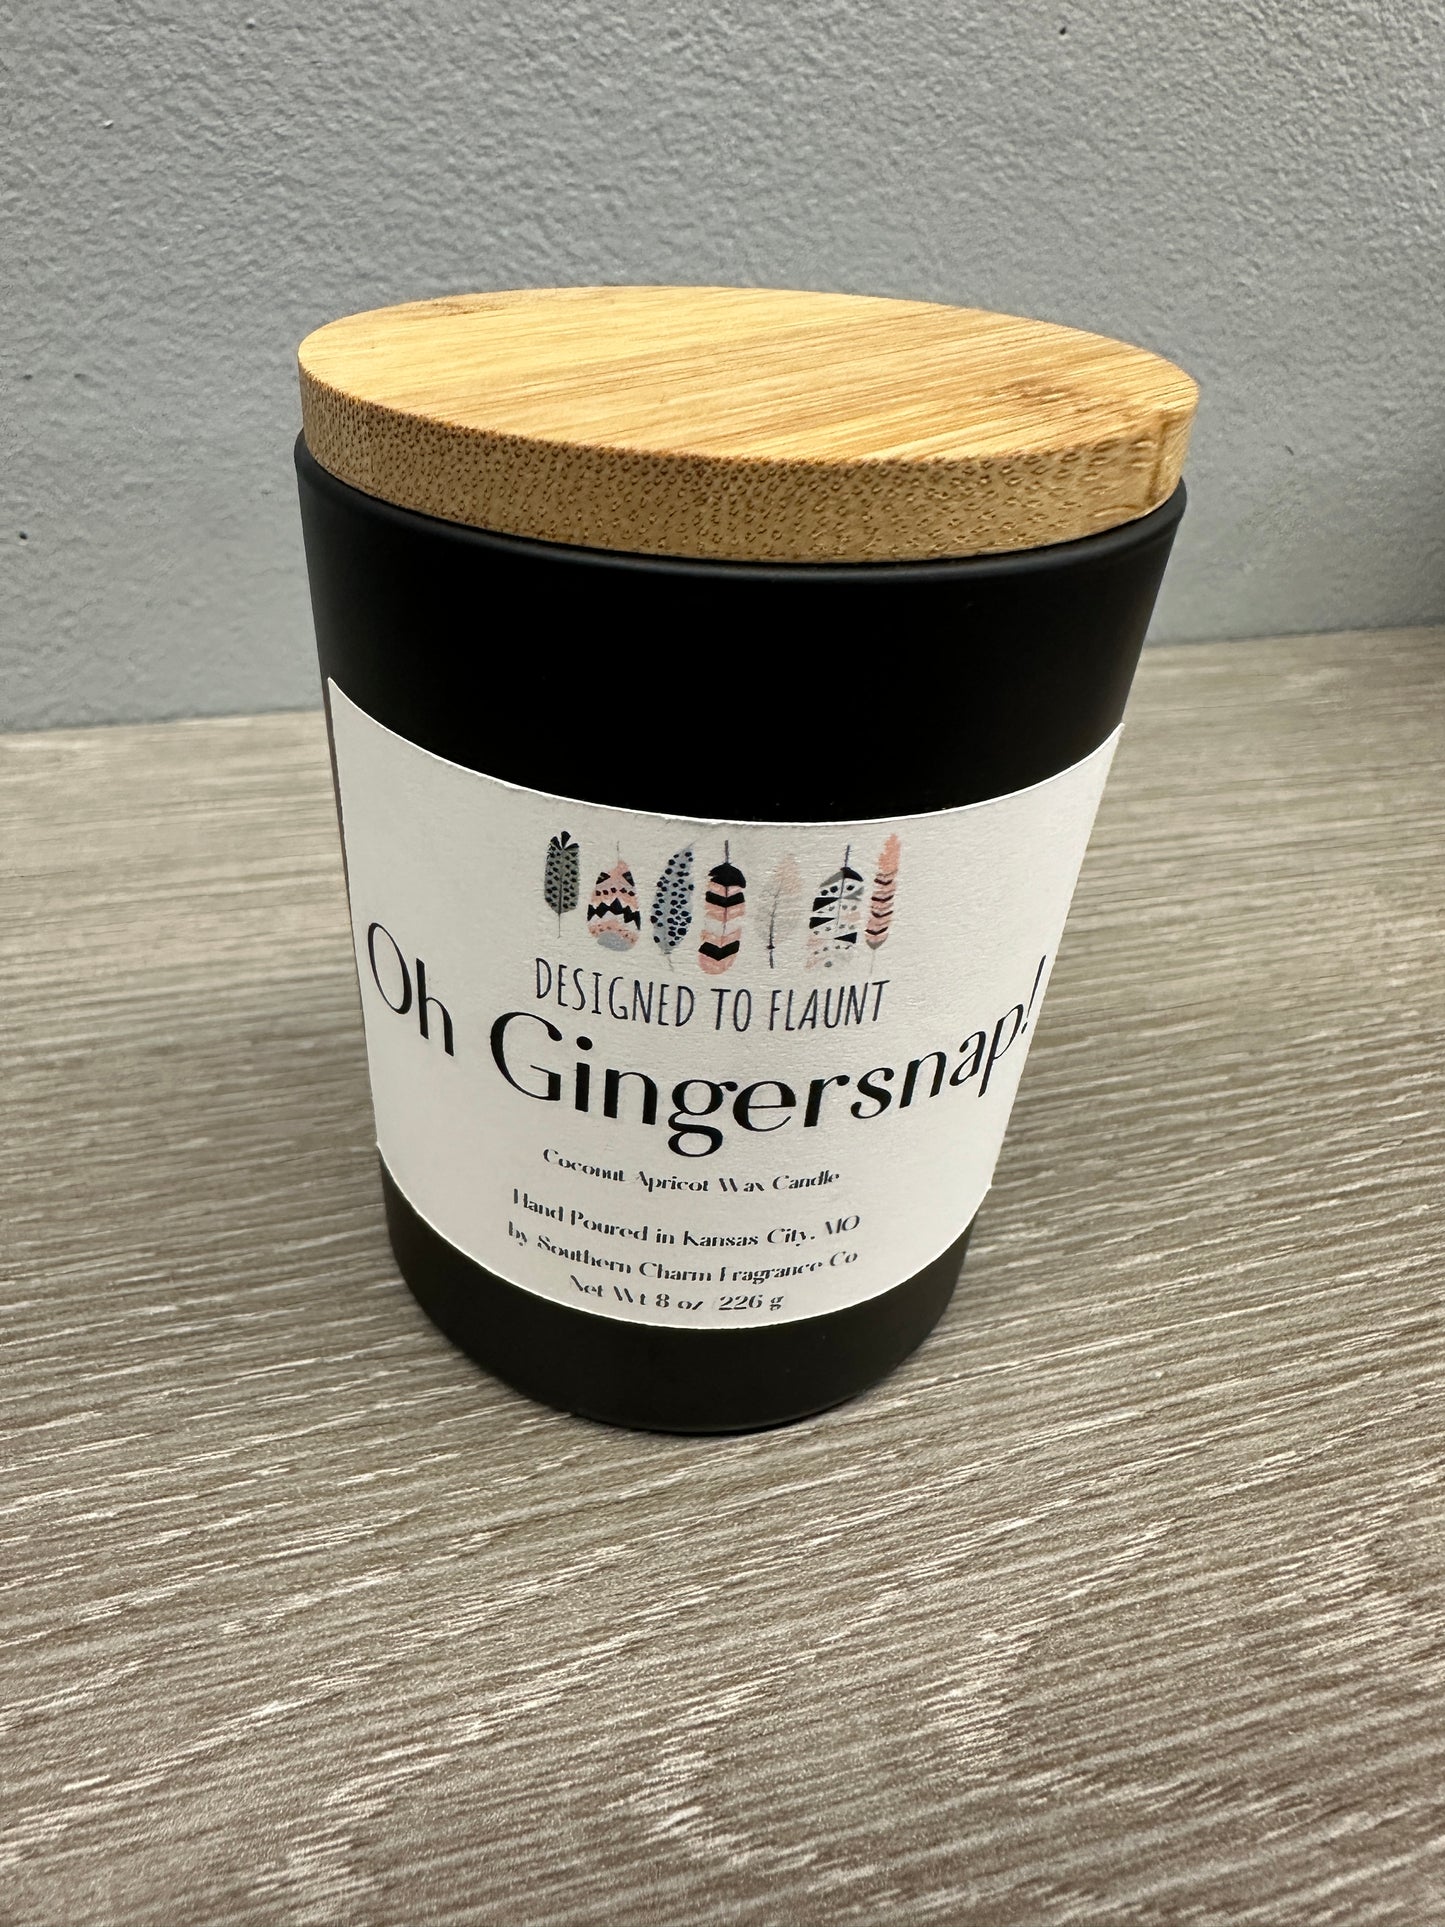 Oh Gingersnap Candle